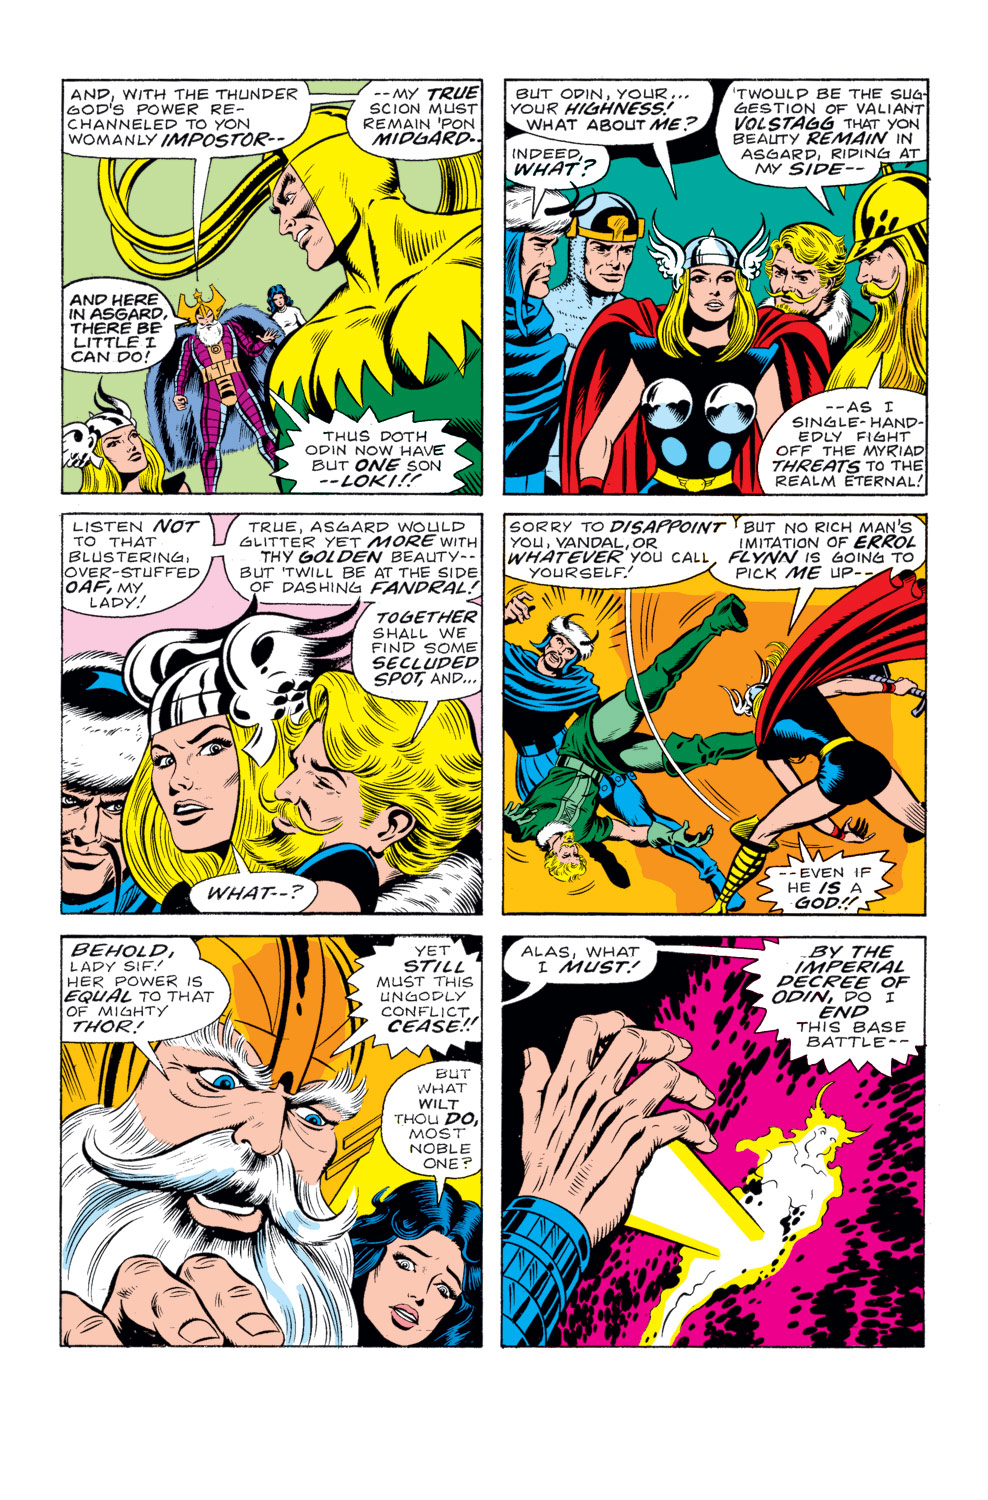 What If? (1977) issue 10 - Jane Foster had found the hammer of Thor - Page 20